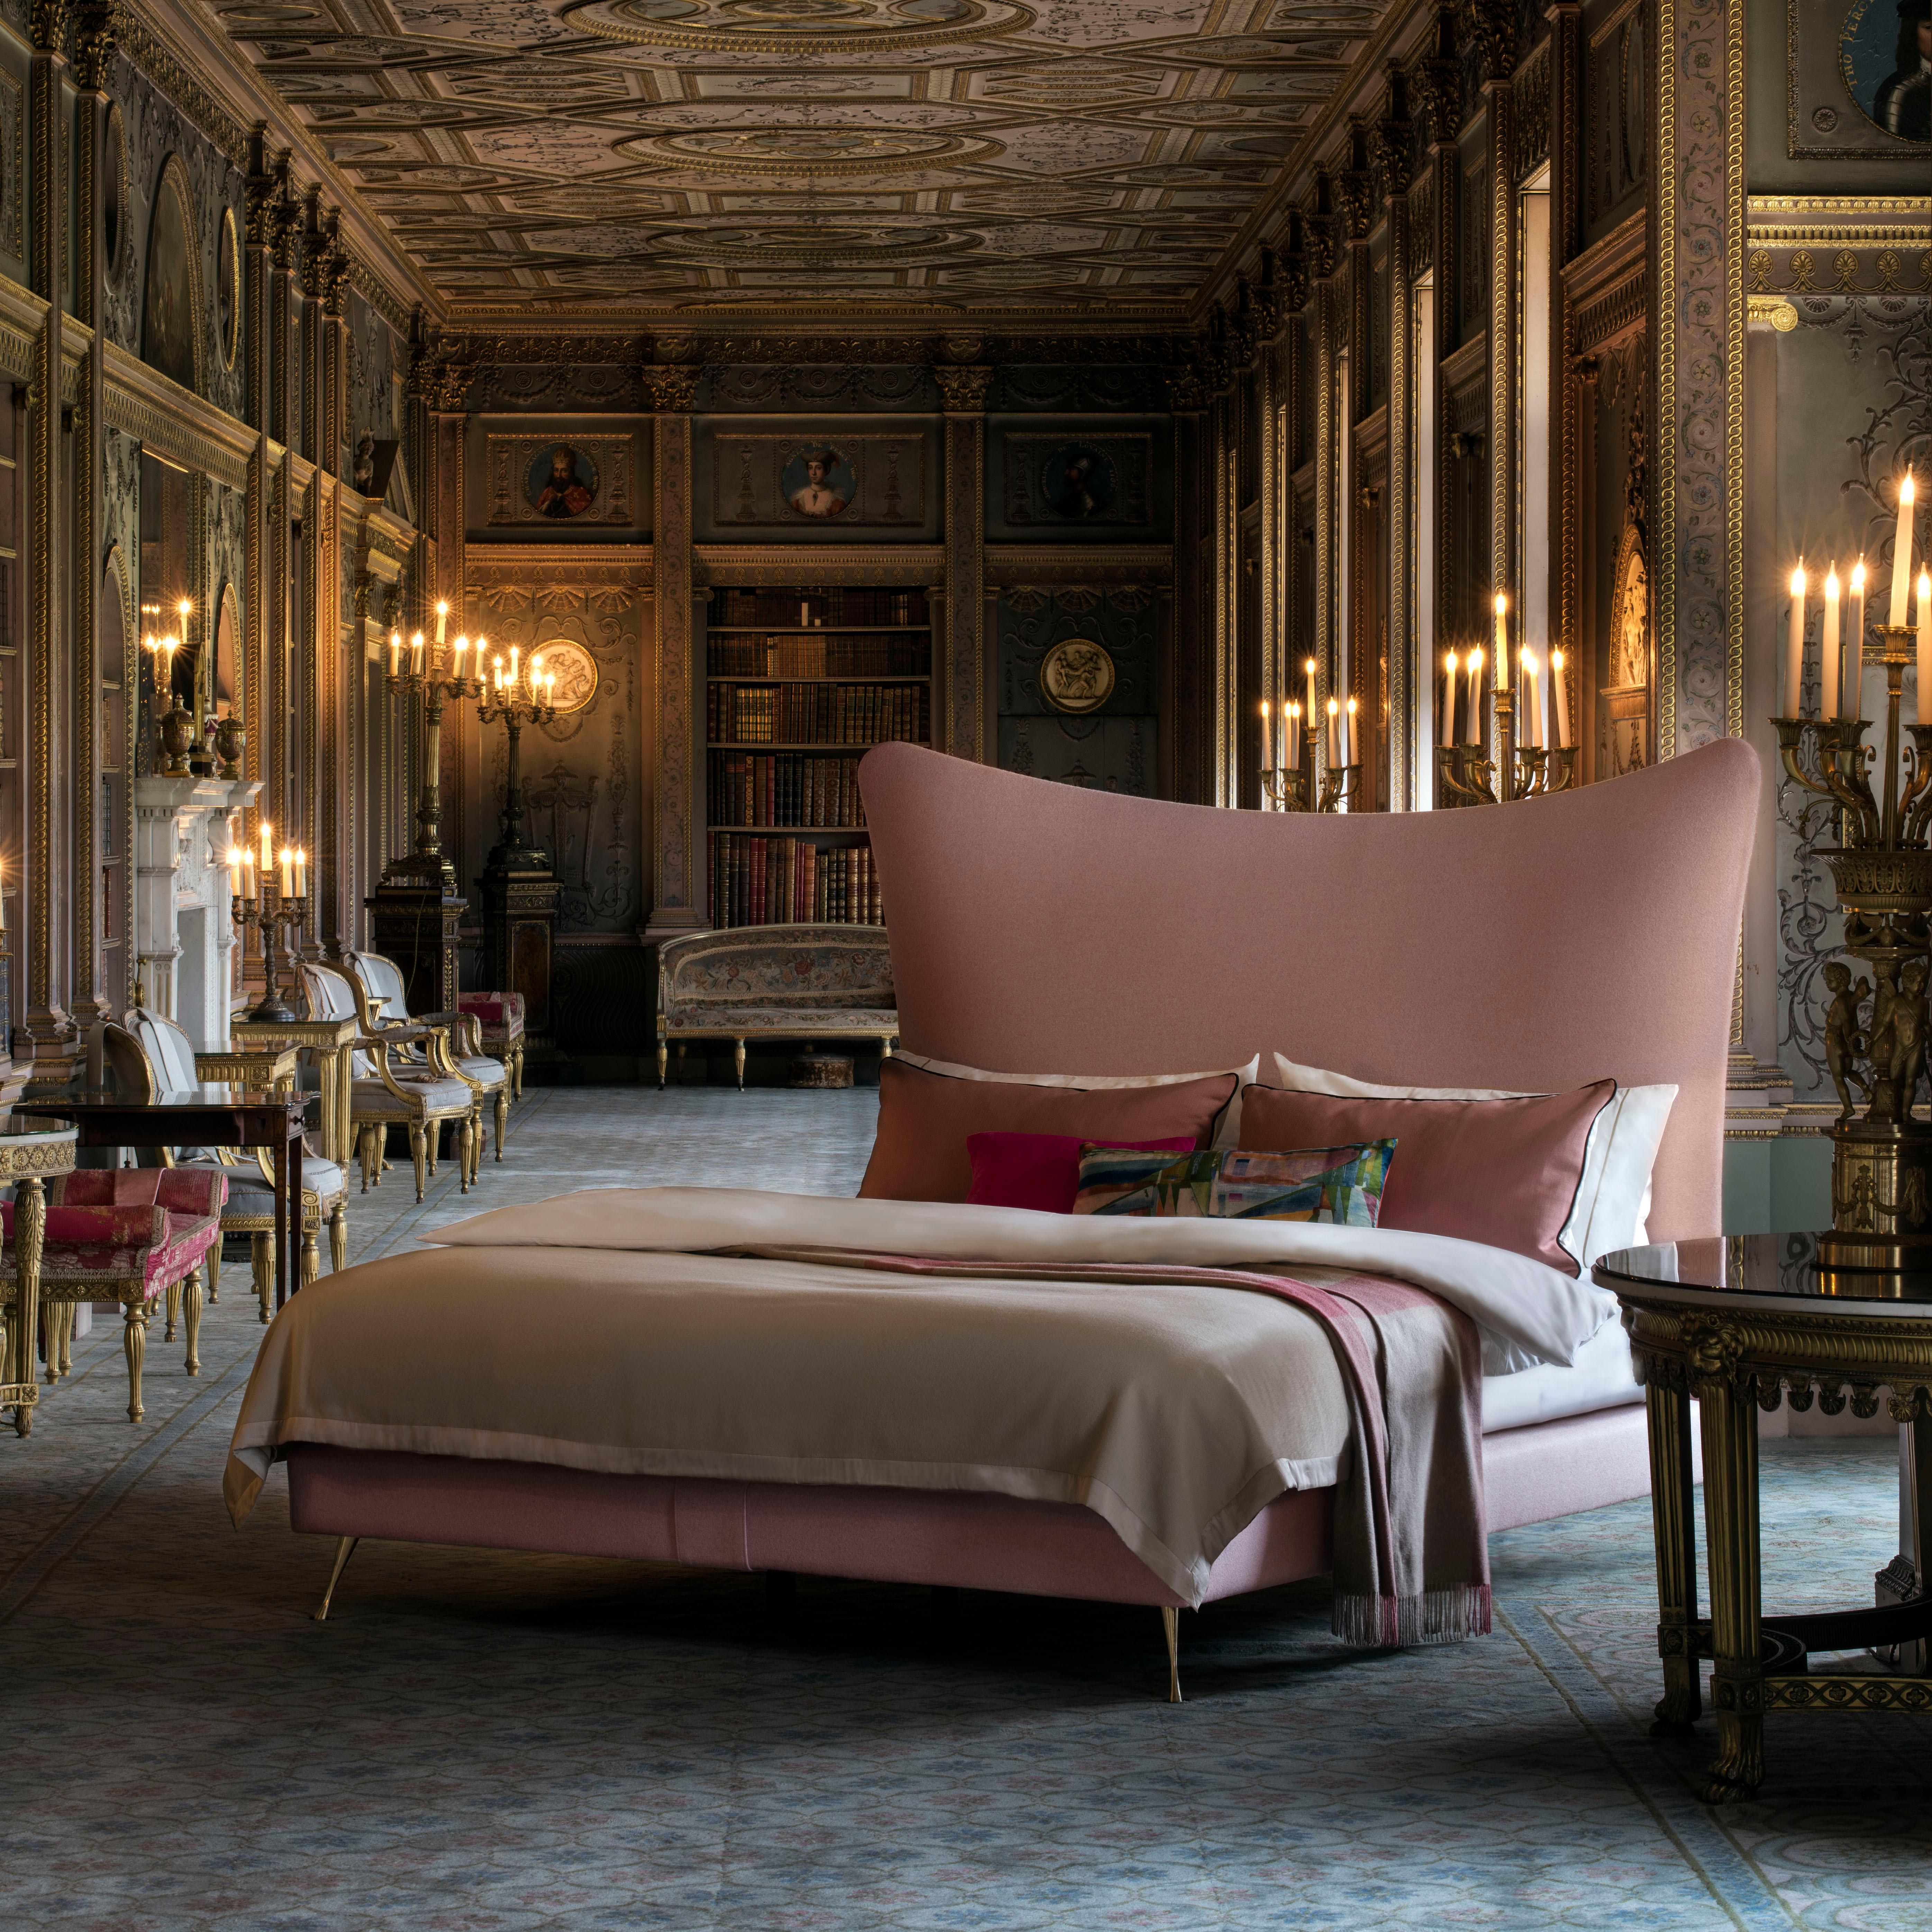 A classic Savoir house design, the soft curves of the Amelia creates a very modern bed design. The headboard silhouette and indulgent pink colourway radiating femininity. Skilfully handcrafted in Savoir London Bedworks, the Amelia headboard and base